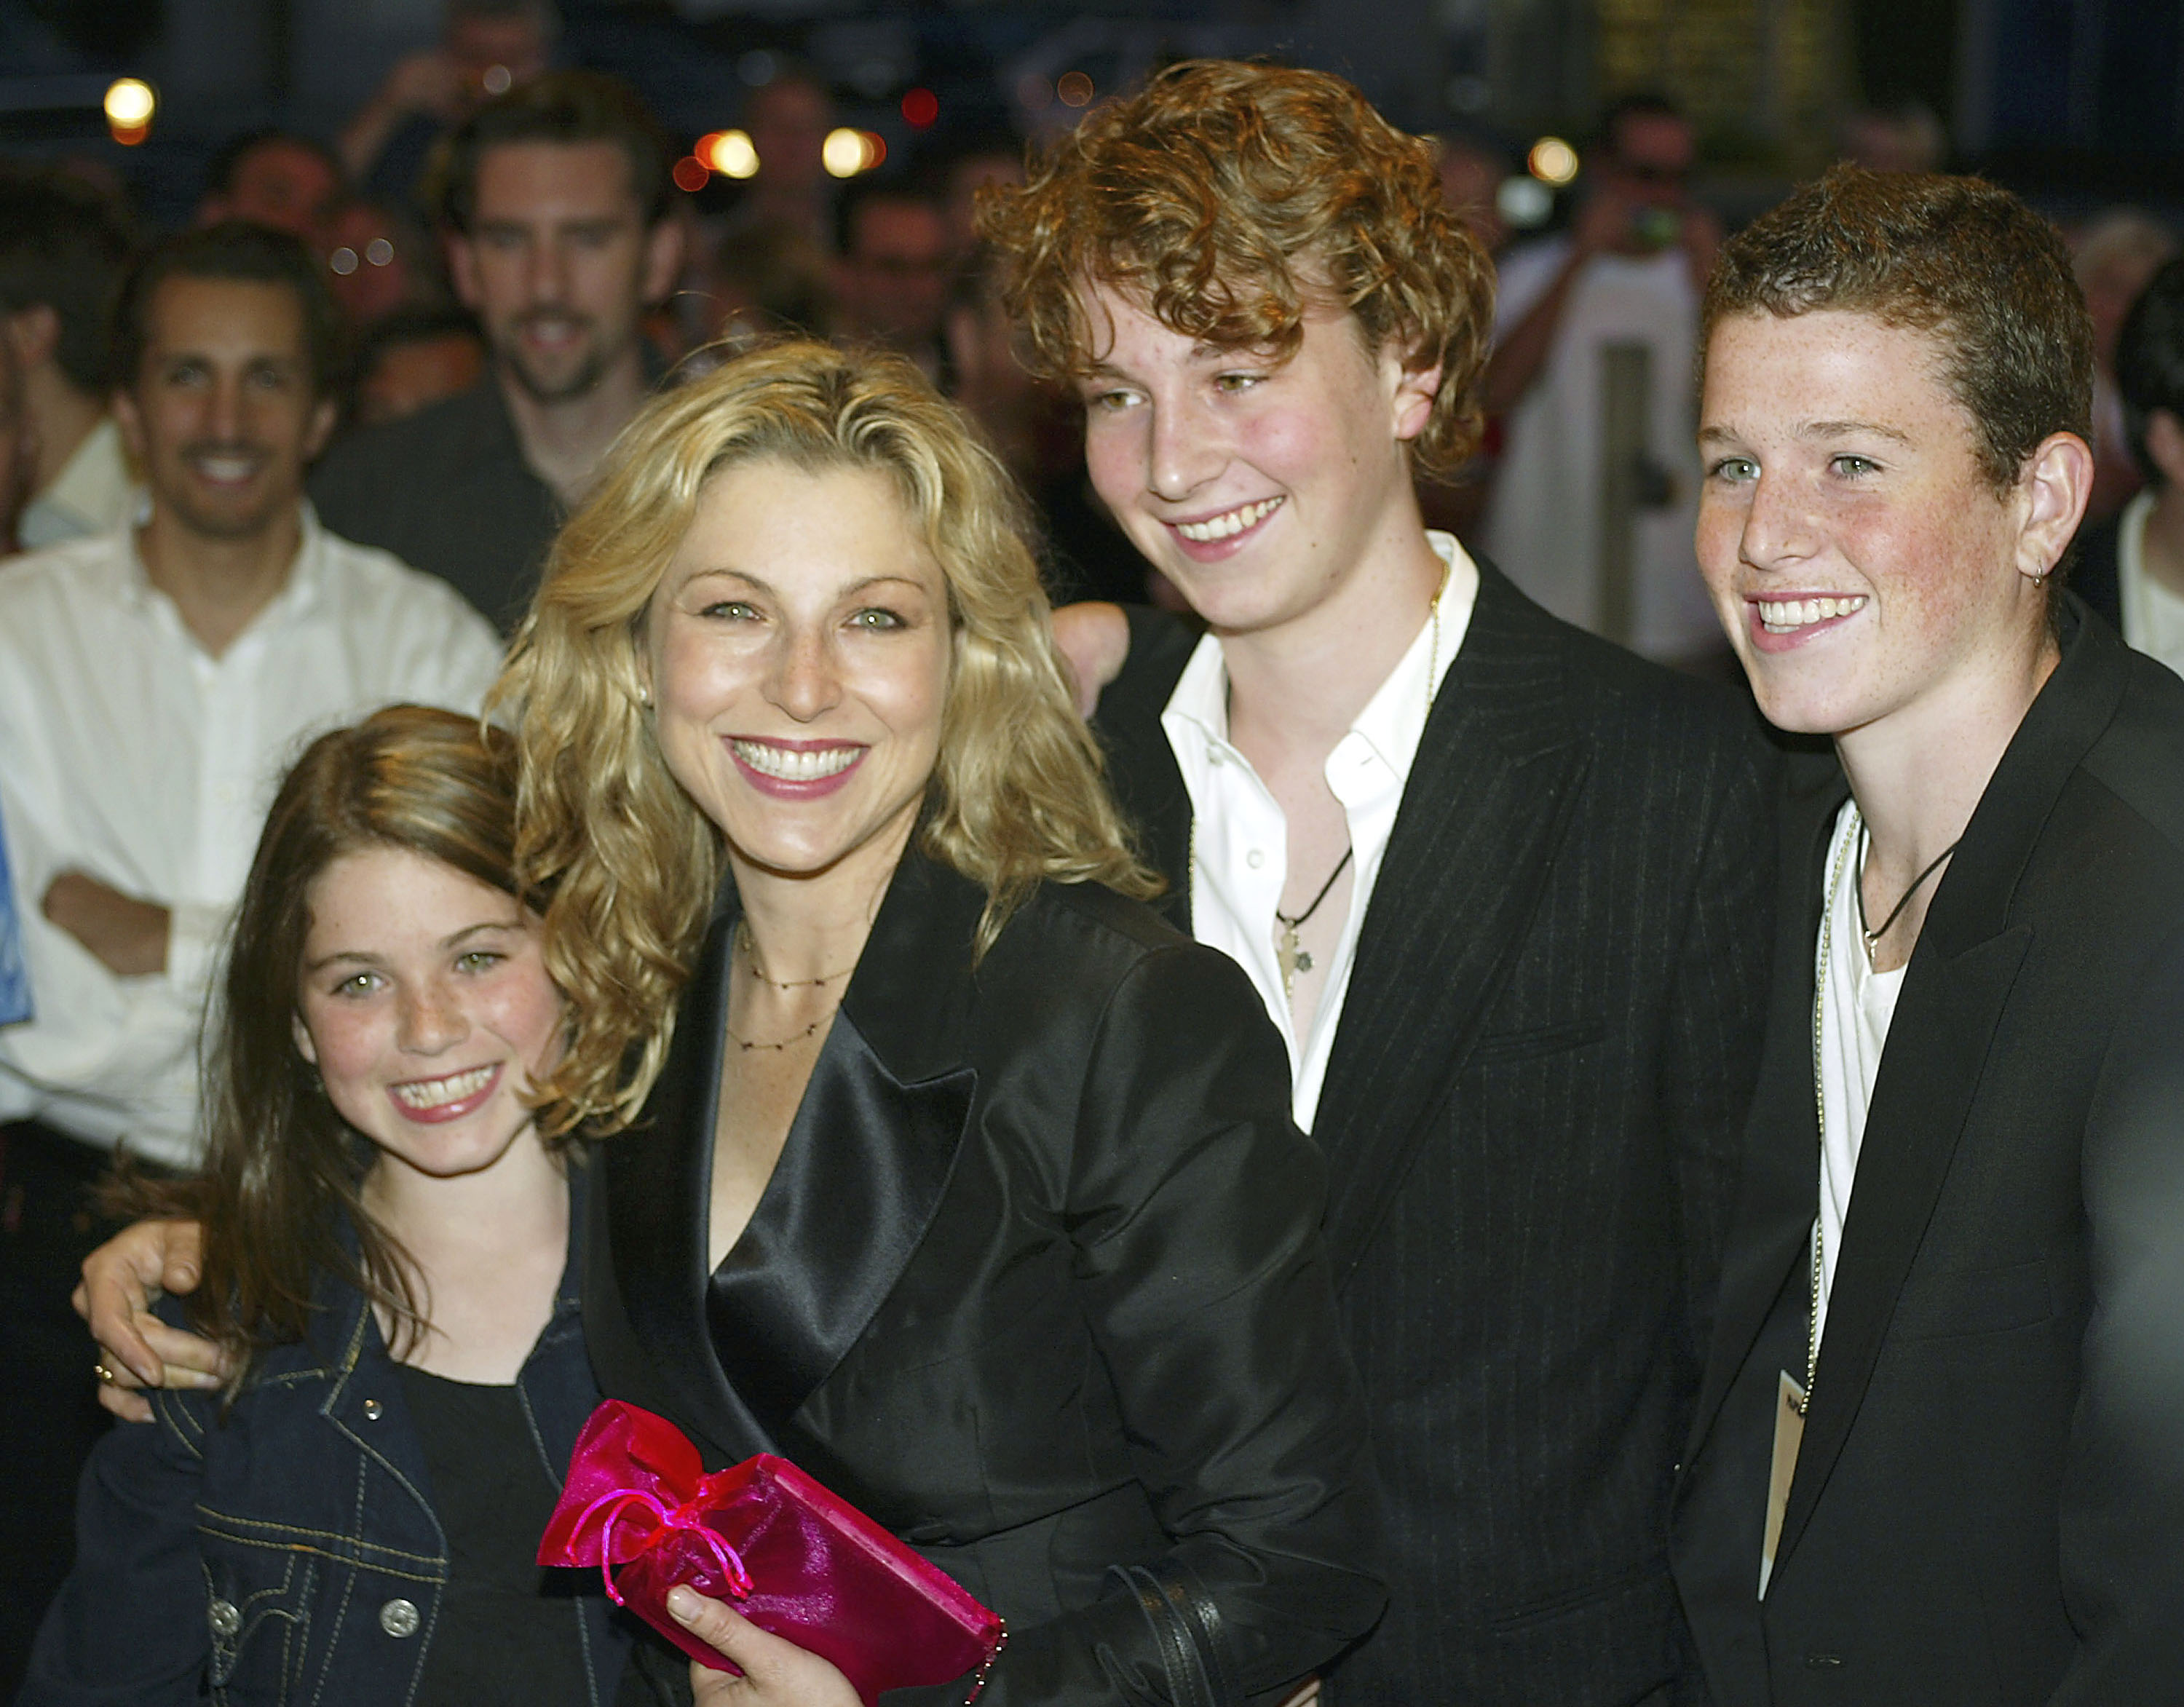 Tatum O'Neal and her children Emily, Kevin and Sean McEnroe at the 30th anniversary screening of "Paper Moon" on August 21, 2003, in California. | Source: Getty Images